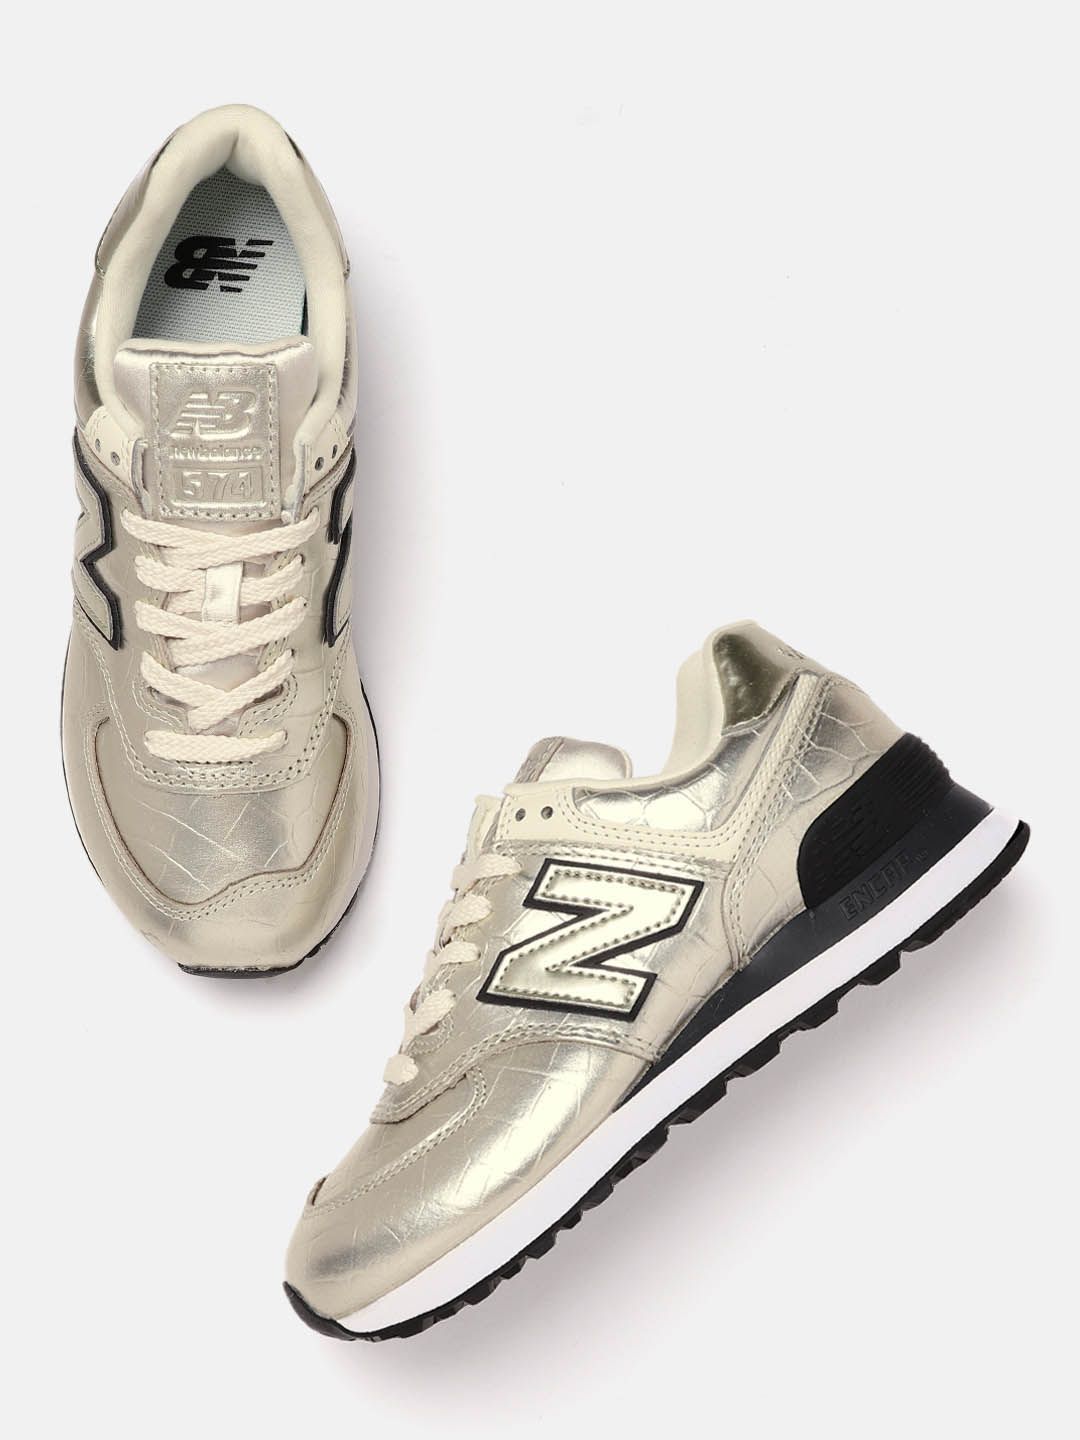 New Balance Women Gold-Toned Croc Textured Sneakers Price in India